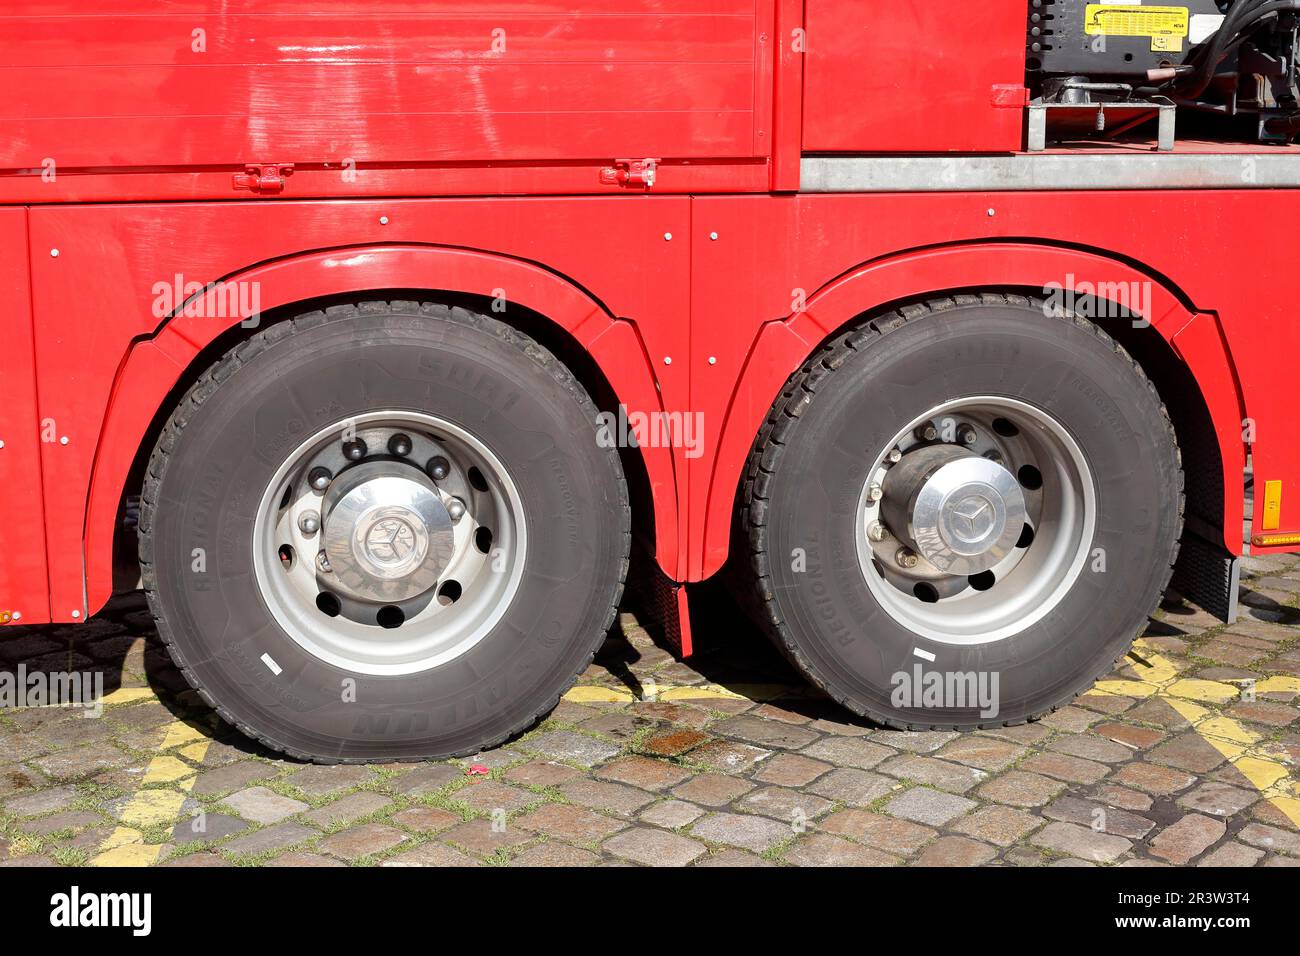 Wheels and tyres on a red Mercedes truck, Germany Stock Photo